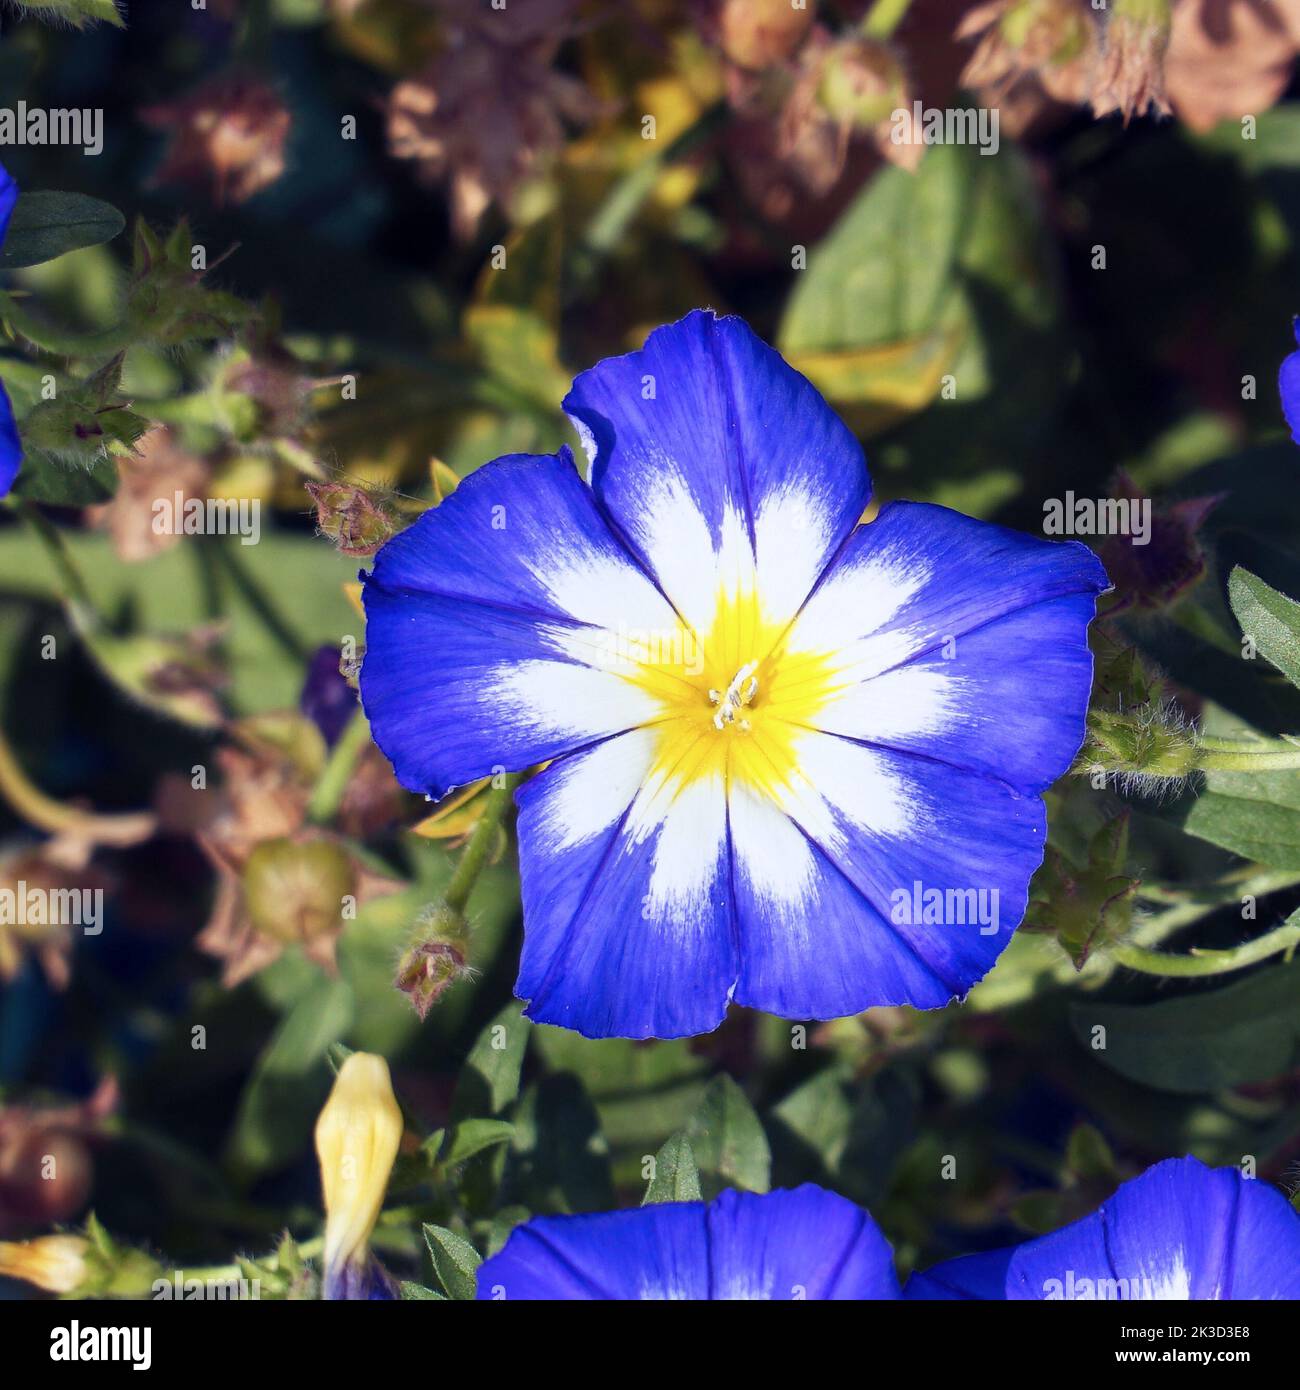 Blue flower morning glory or bindweed on the lawn in the flower garden. Convolvulus Tricolor Stock Photo